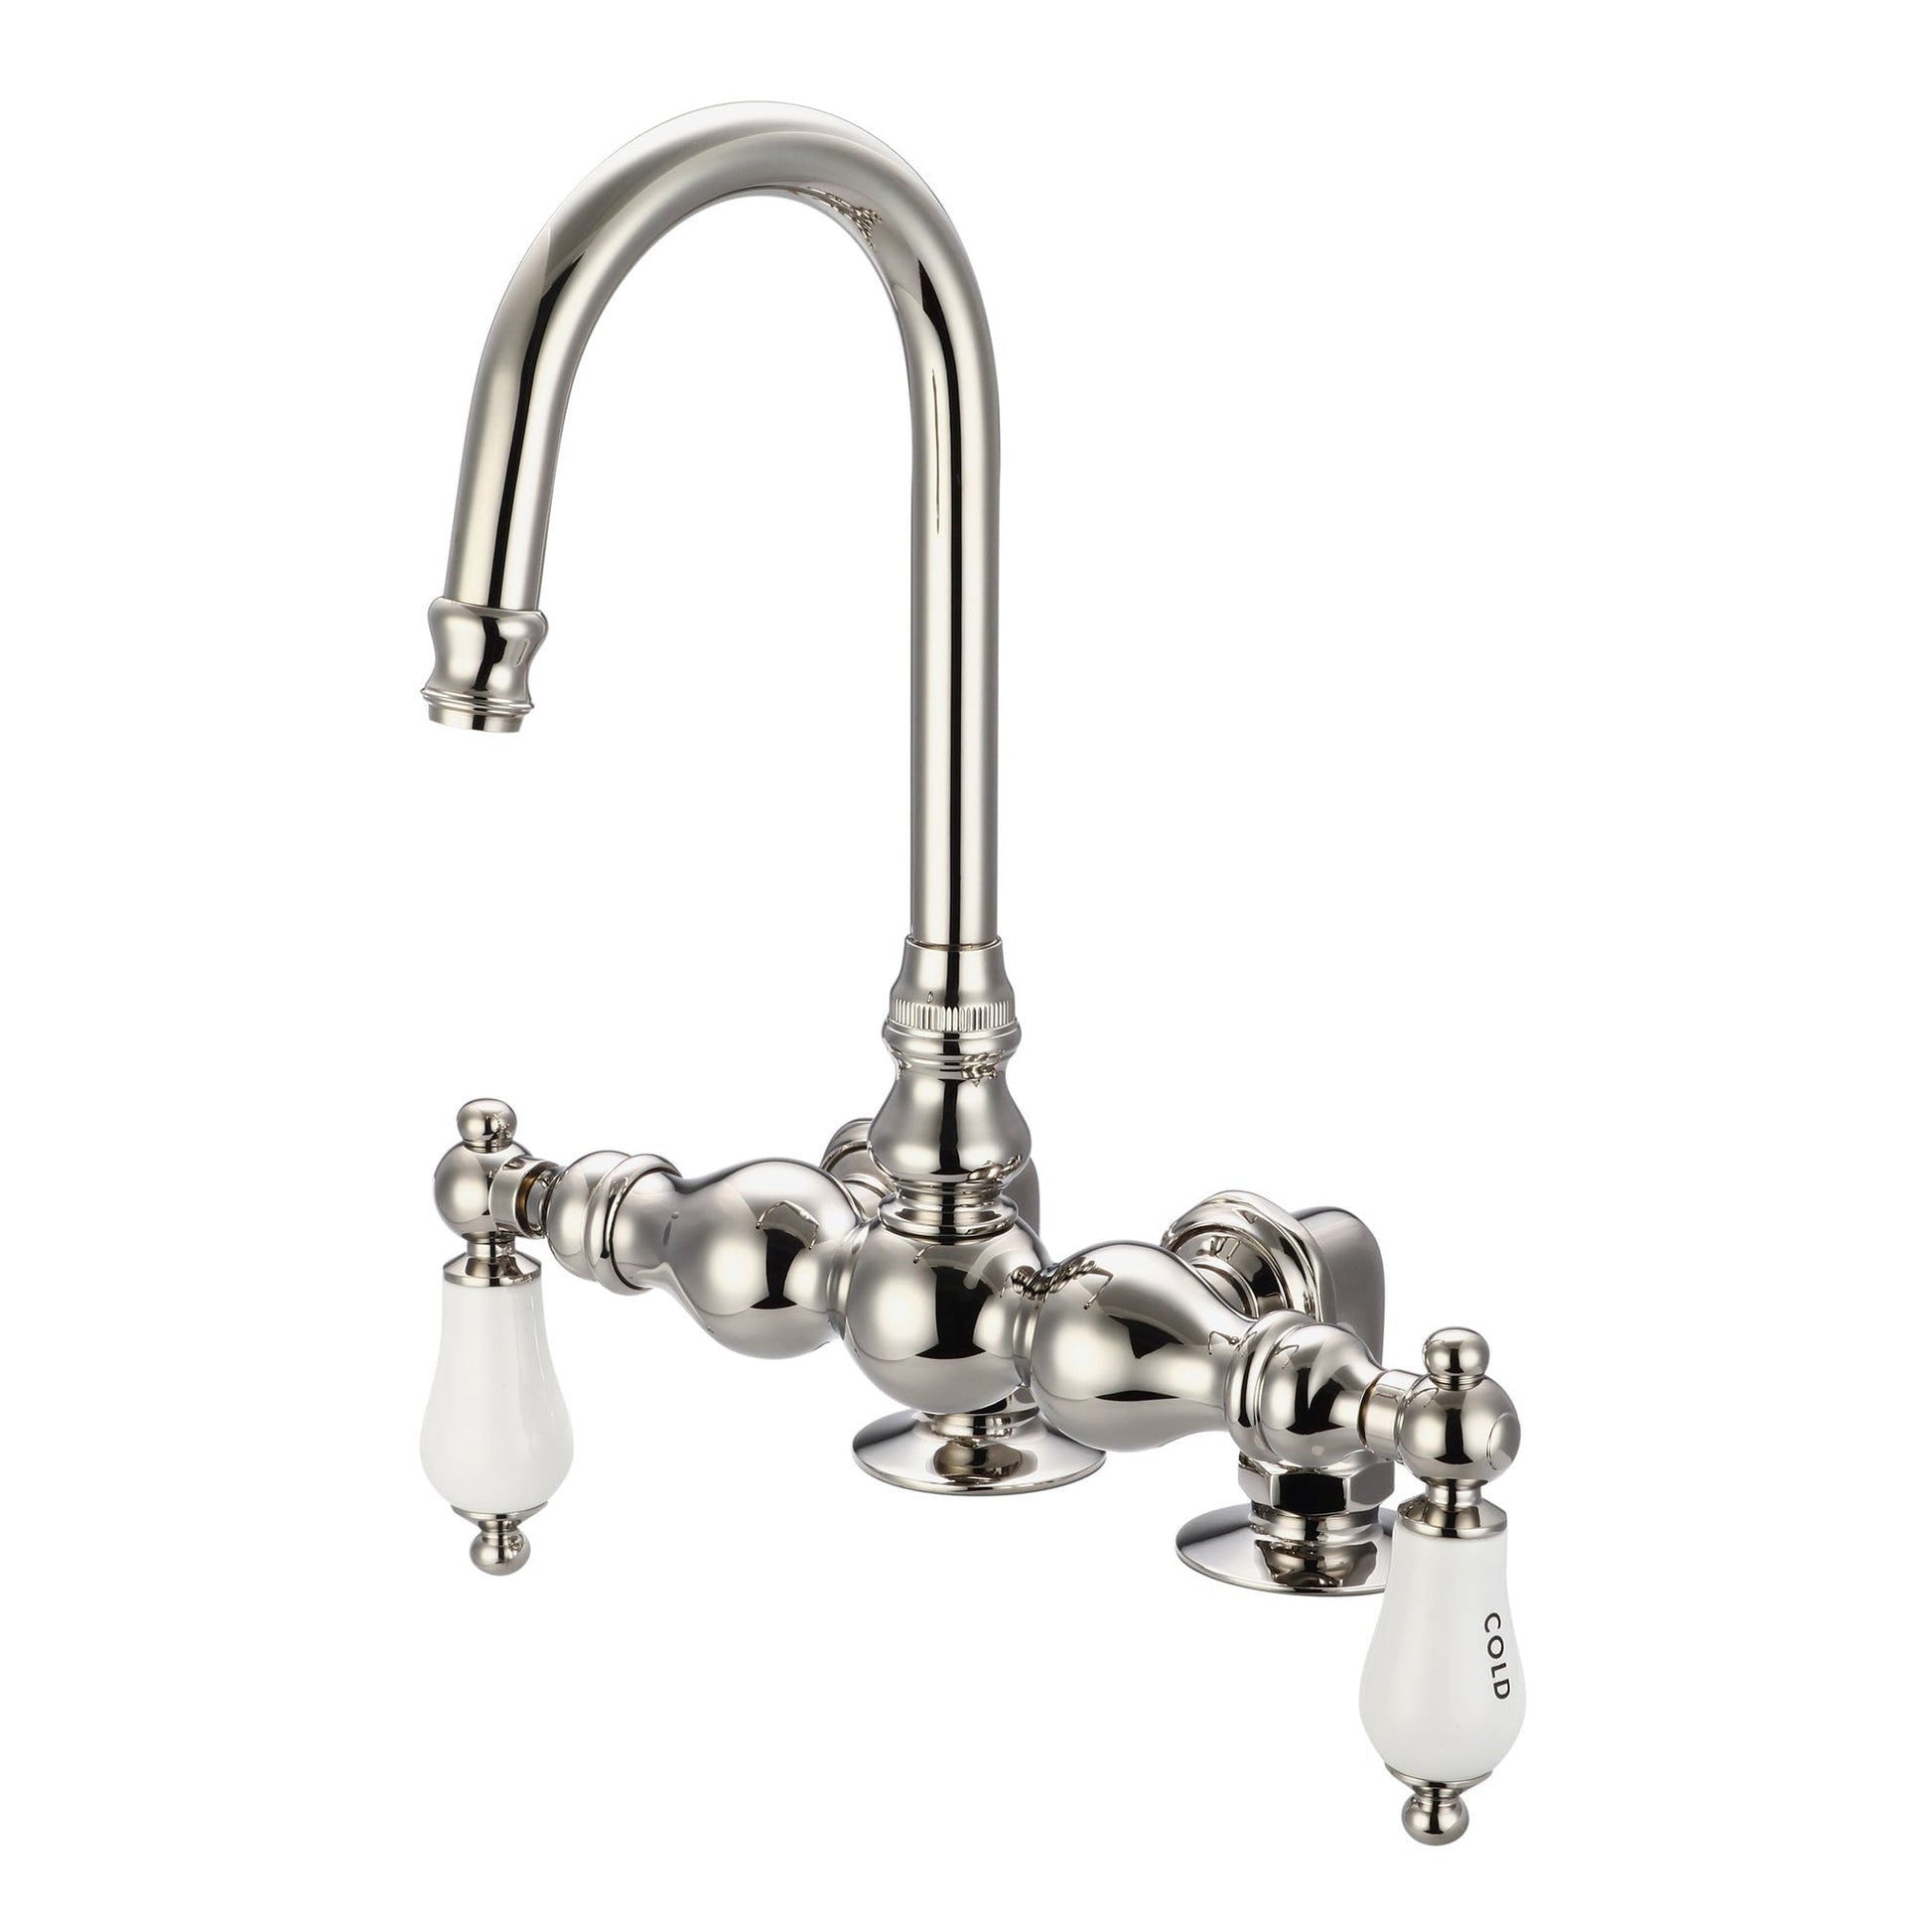 Water Creation Vintage Classic Center Deck Mount Tub F6-0016 9.25" Ivory Solid Brass Faucet With Gooseneck Spout And 2-Inch Risers And Porcelain Lever Handles, Hot And Cold Labels Included